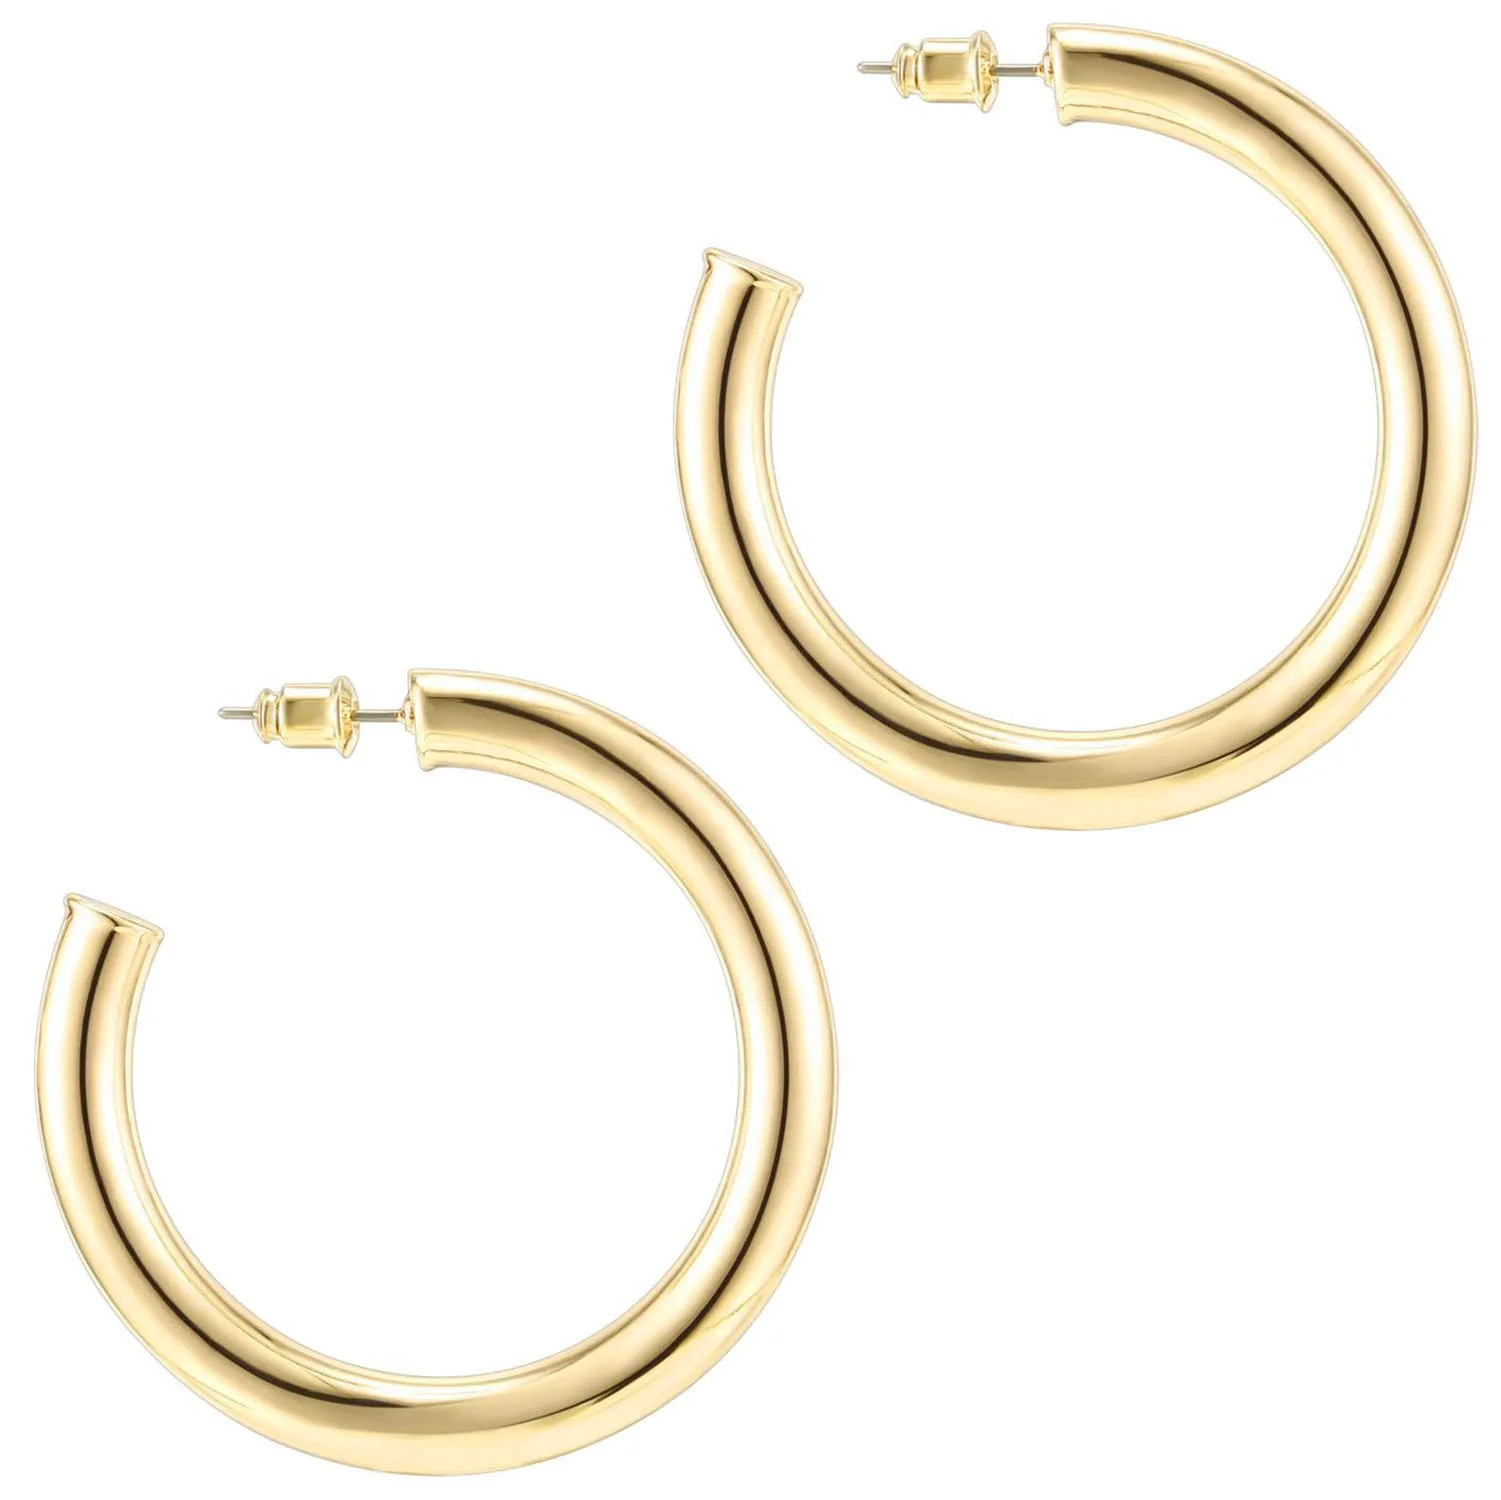 

14K Gold Colored Lightweight Chunky Open Hoops Stainless Steel Hoop Earrings for Women Free Shipping Wholesale